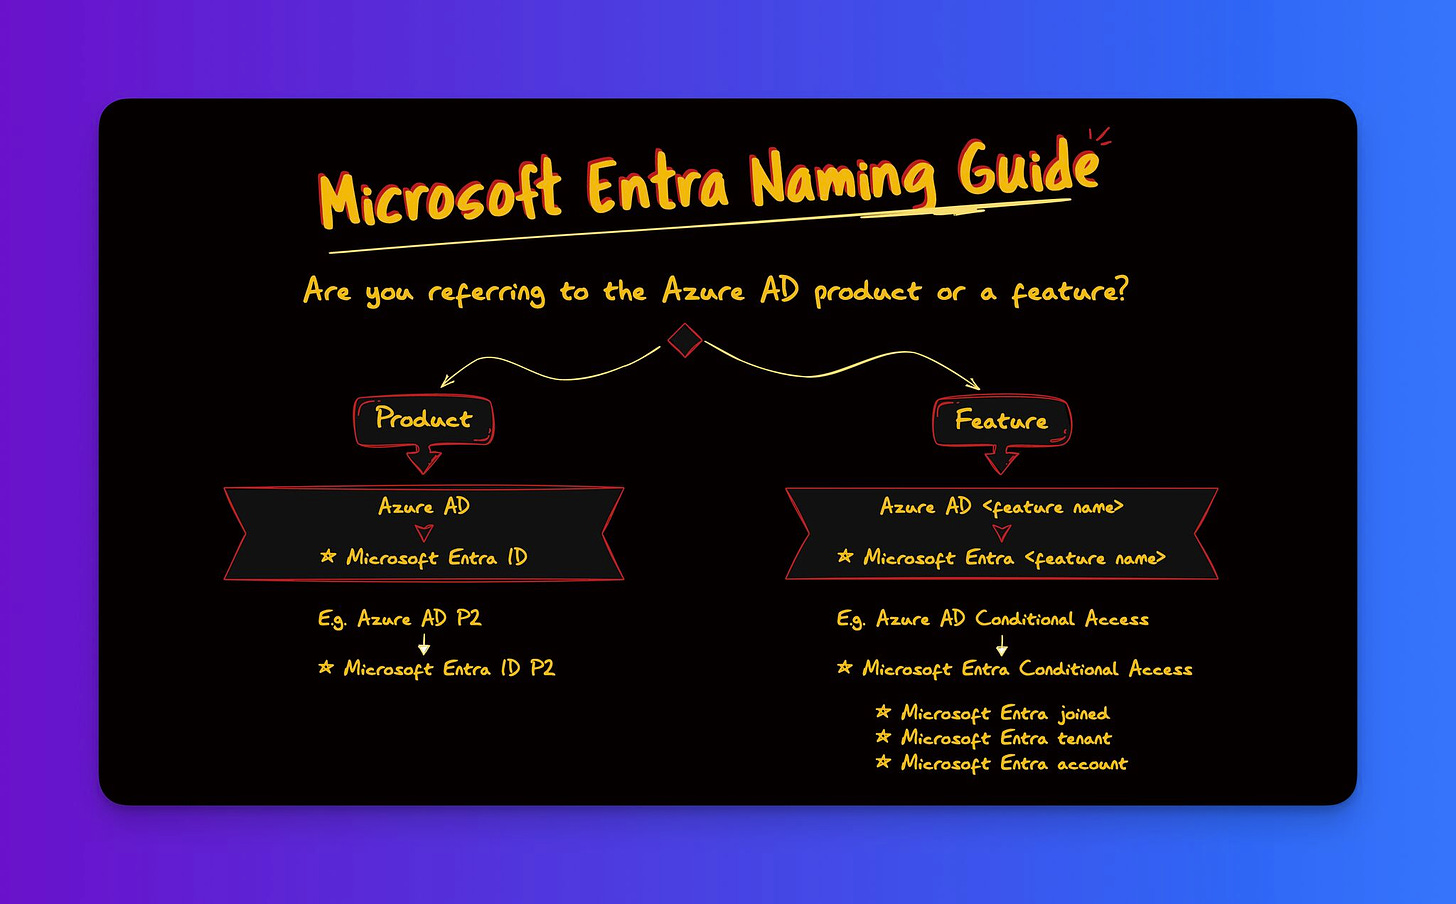 Microsoft Entra Naming Guide
Are you referring to the Azure AD Product or a feature?

If it is a Product then Azure AD is replaced with Microsoft Entra ID
E.g. Azure AD P2 = Microsoft Entra ID P2

If it is a Feature then Azure AD is replaced with Microsoft Entra
E.g. Azure AD Conditional Access = Microsoft Entra Conditional Access
